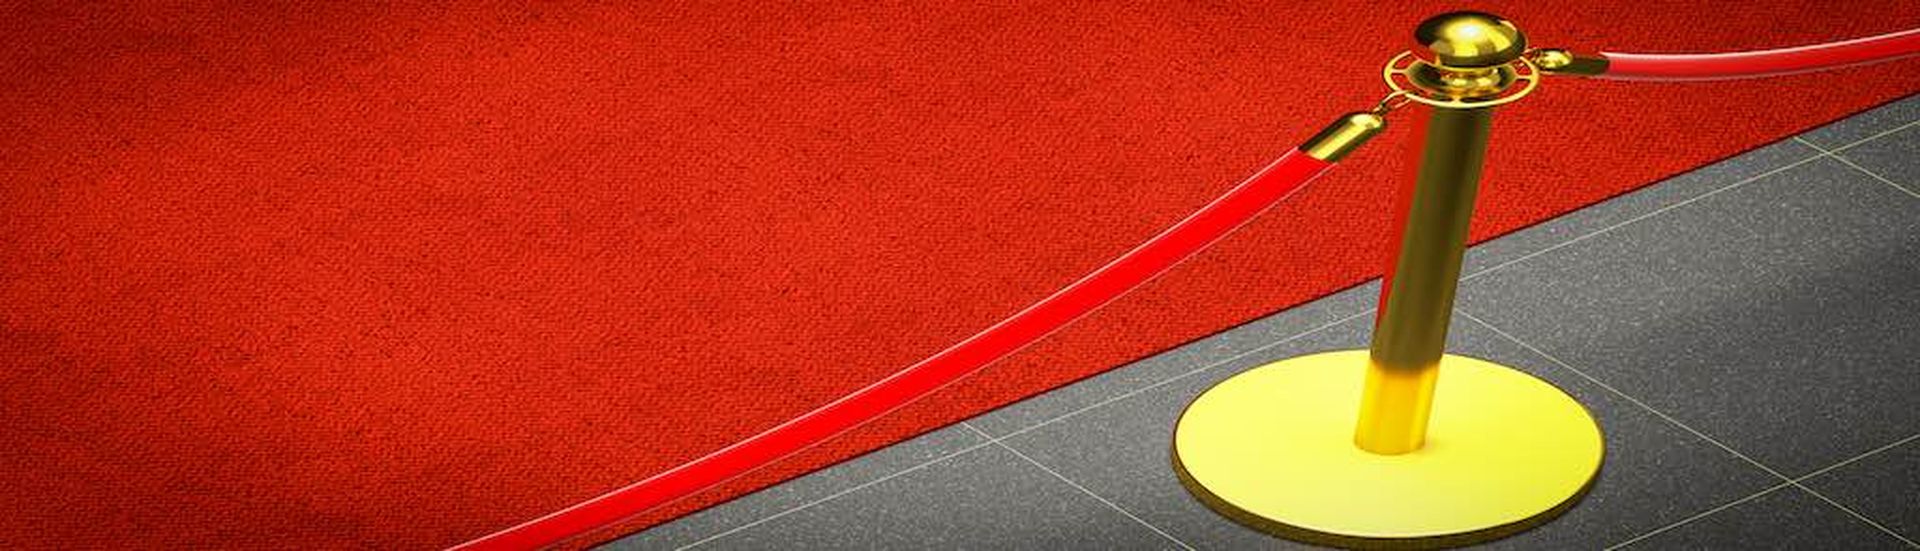 detail of red carpet and barrier 3d rendering image